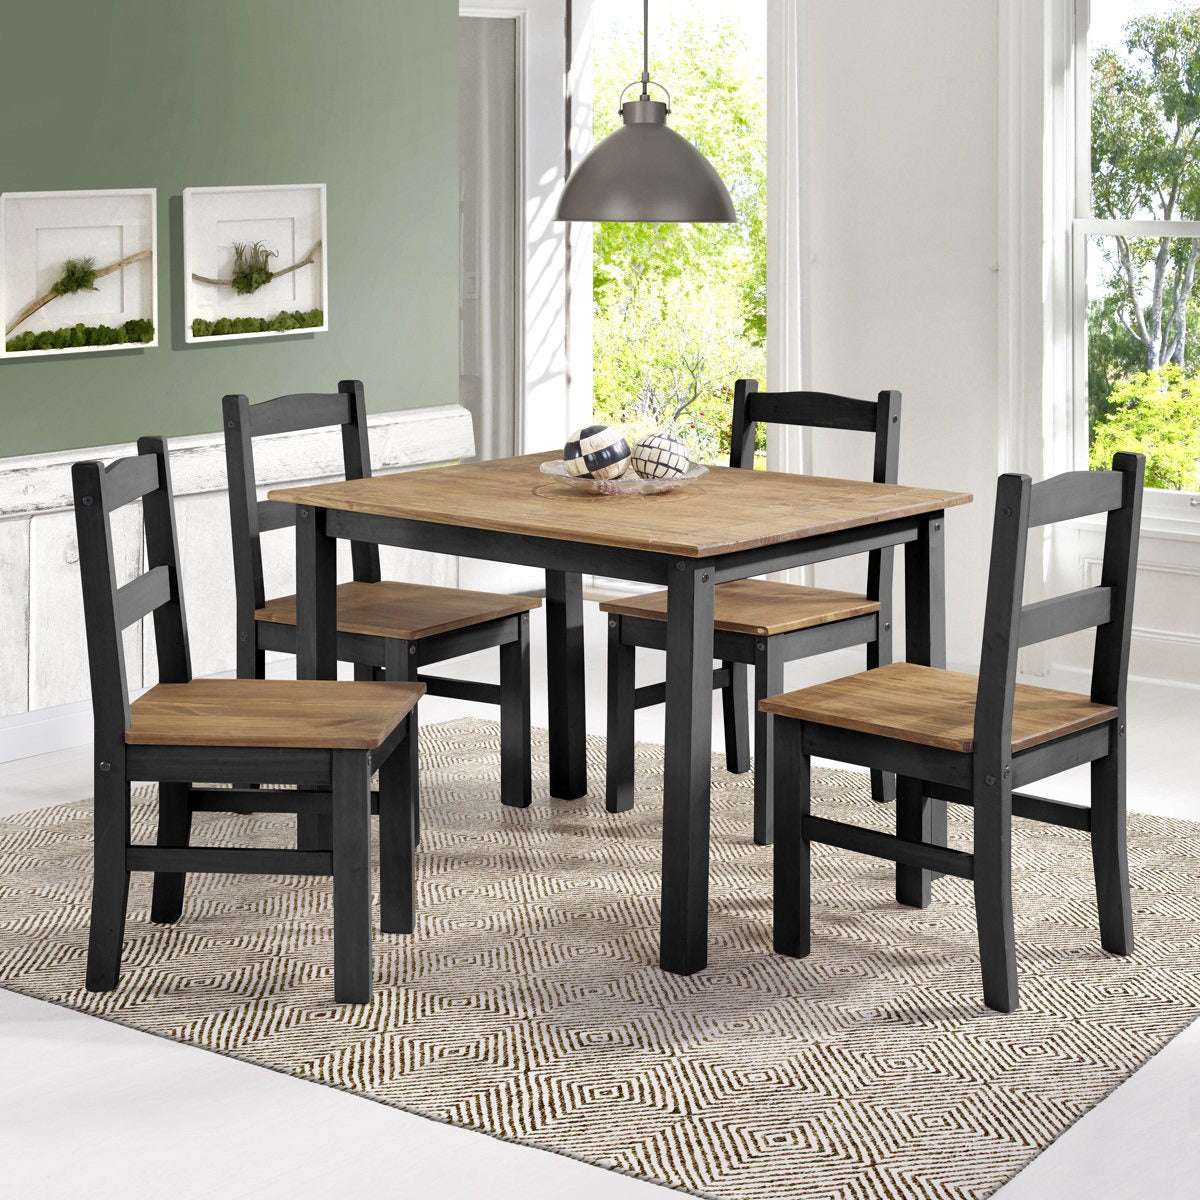 Manhattan Comfort York 5-Piece Solid Wood Dining Set with 1 Table and 4 Chairs in Black Wash-Minimal & Modern